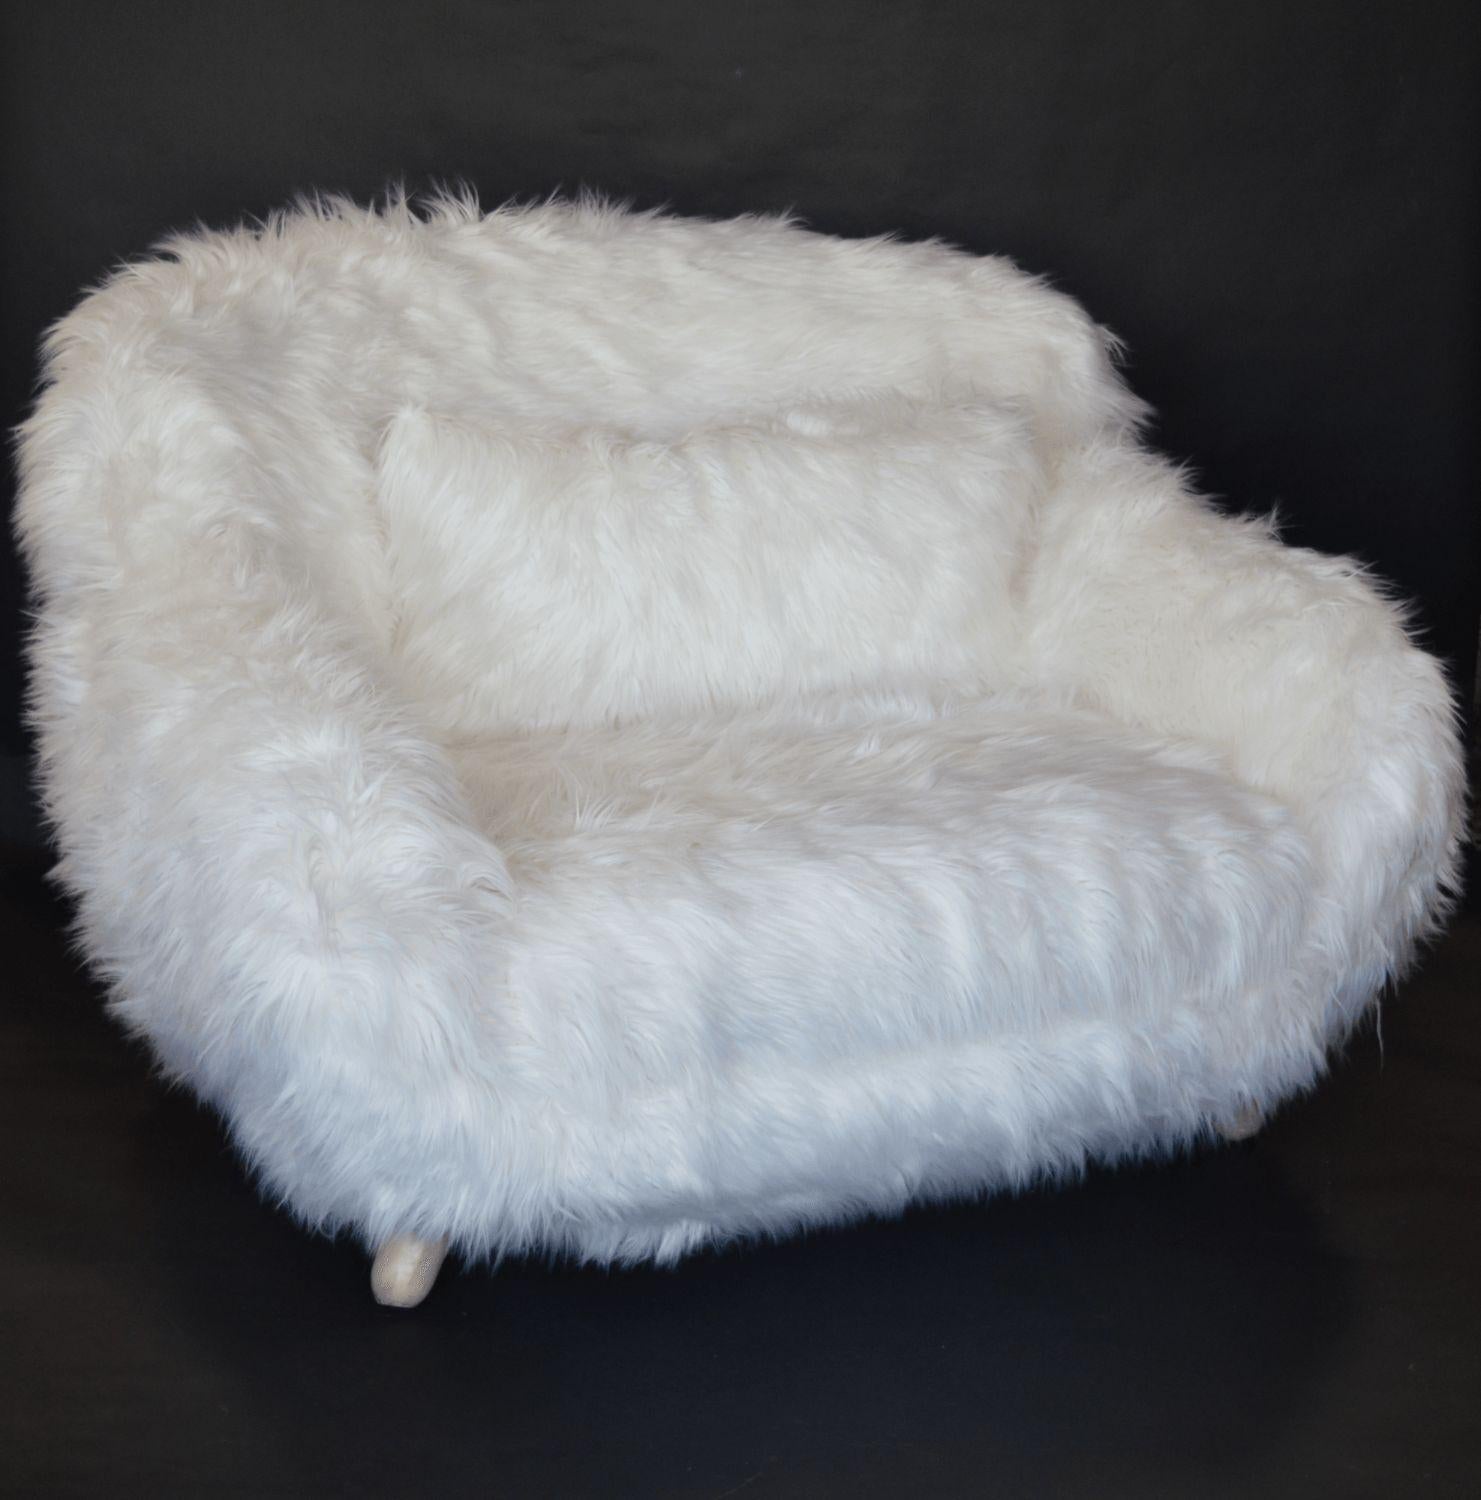 Pair of soft white oversized faux-fur arm chairs.
 
*Newly upholstered.